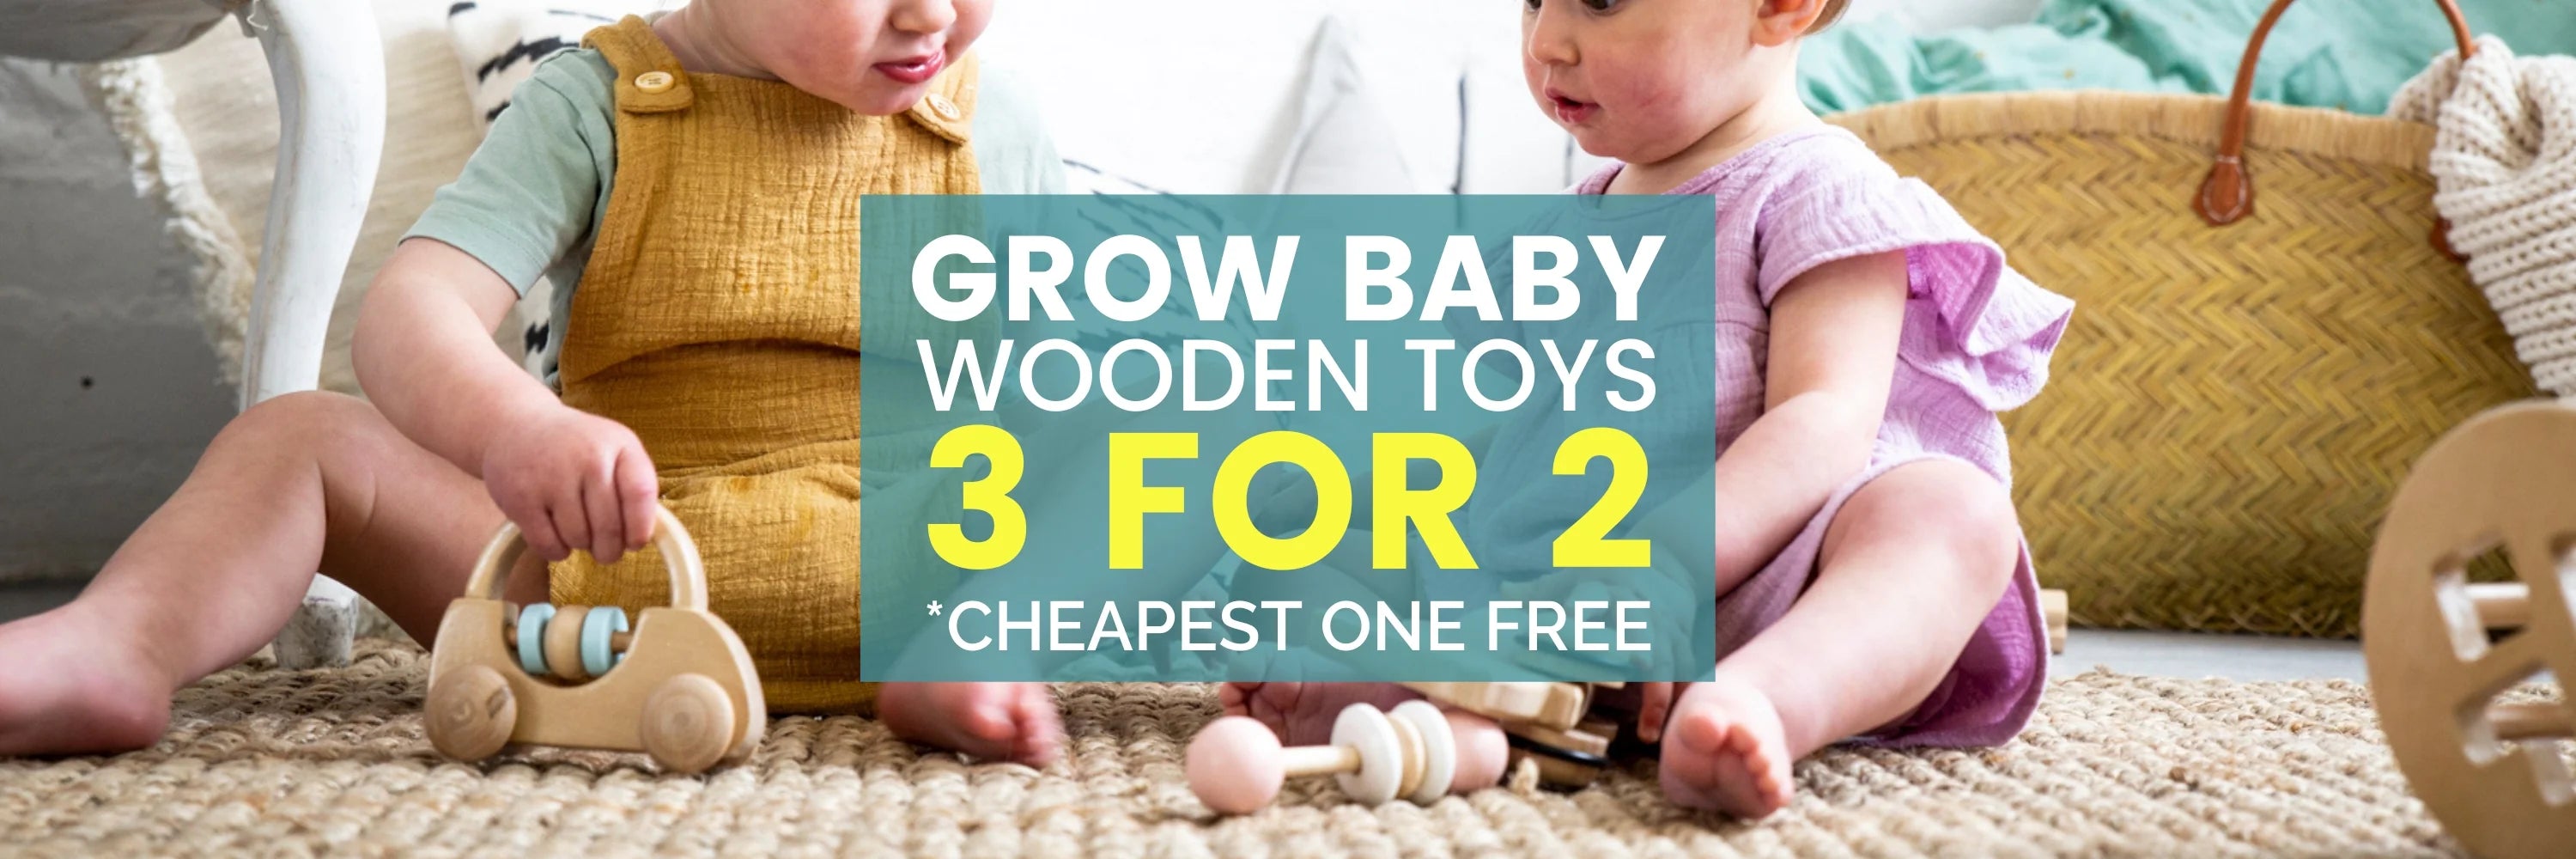 Grow Baby 3 For 2 Promotion